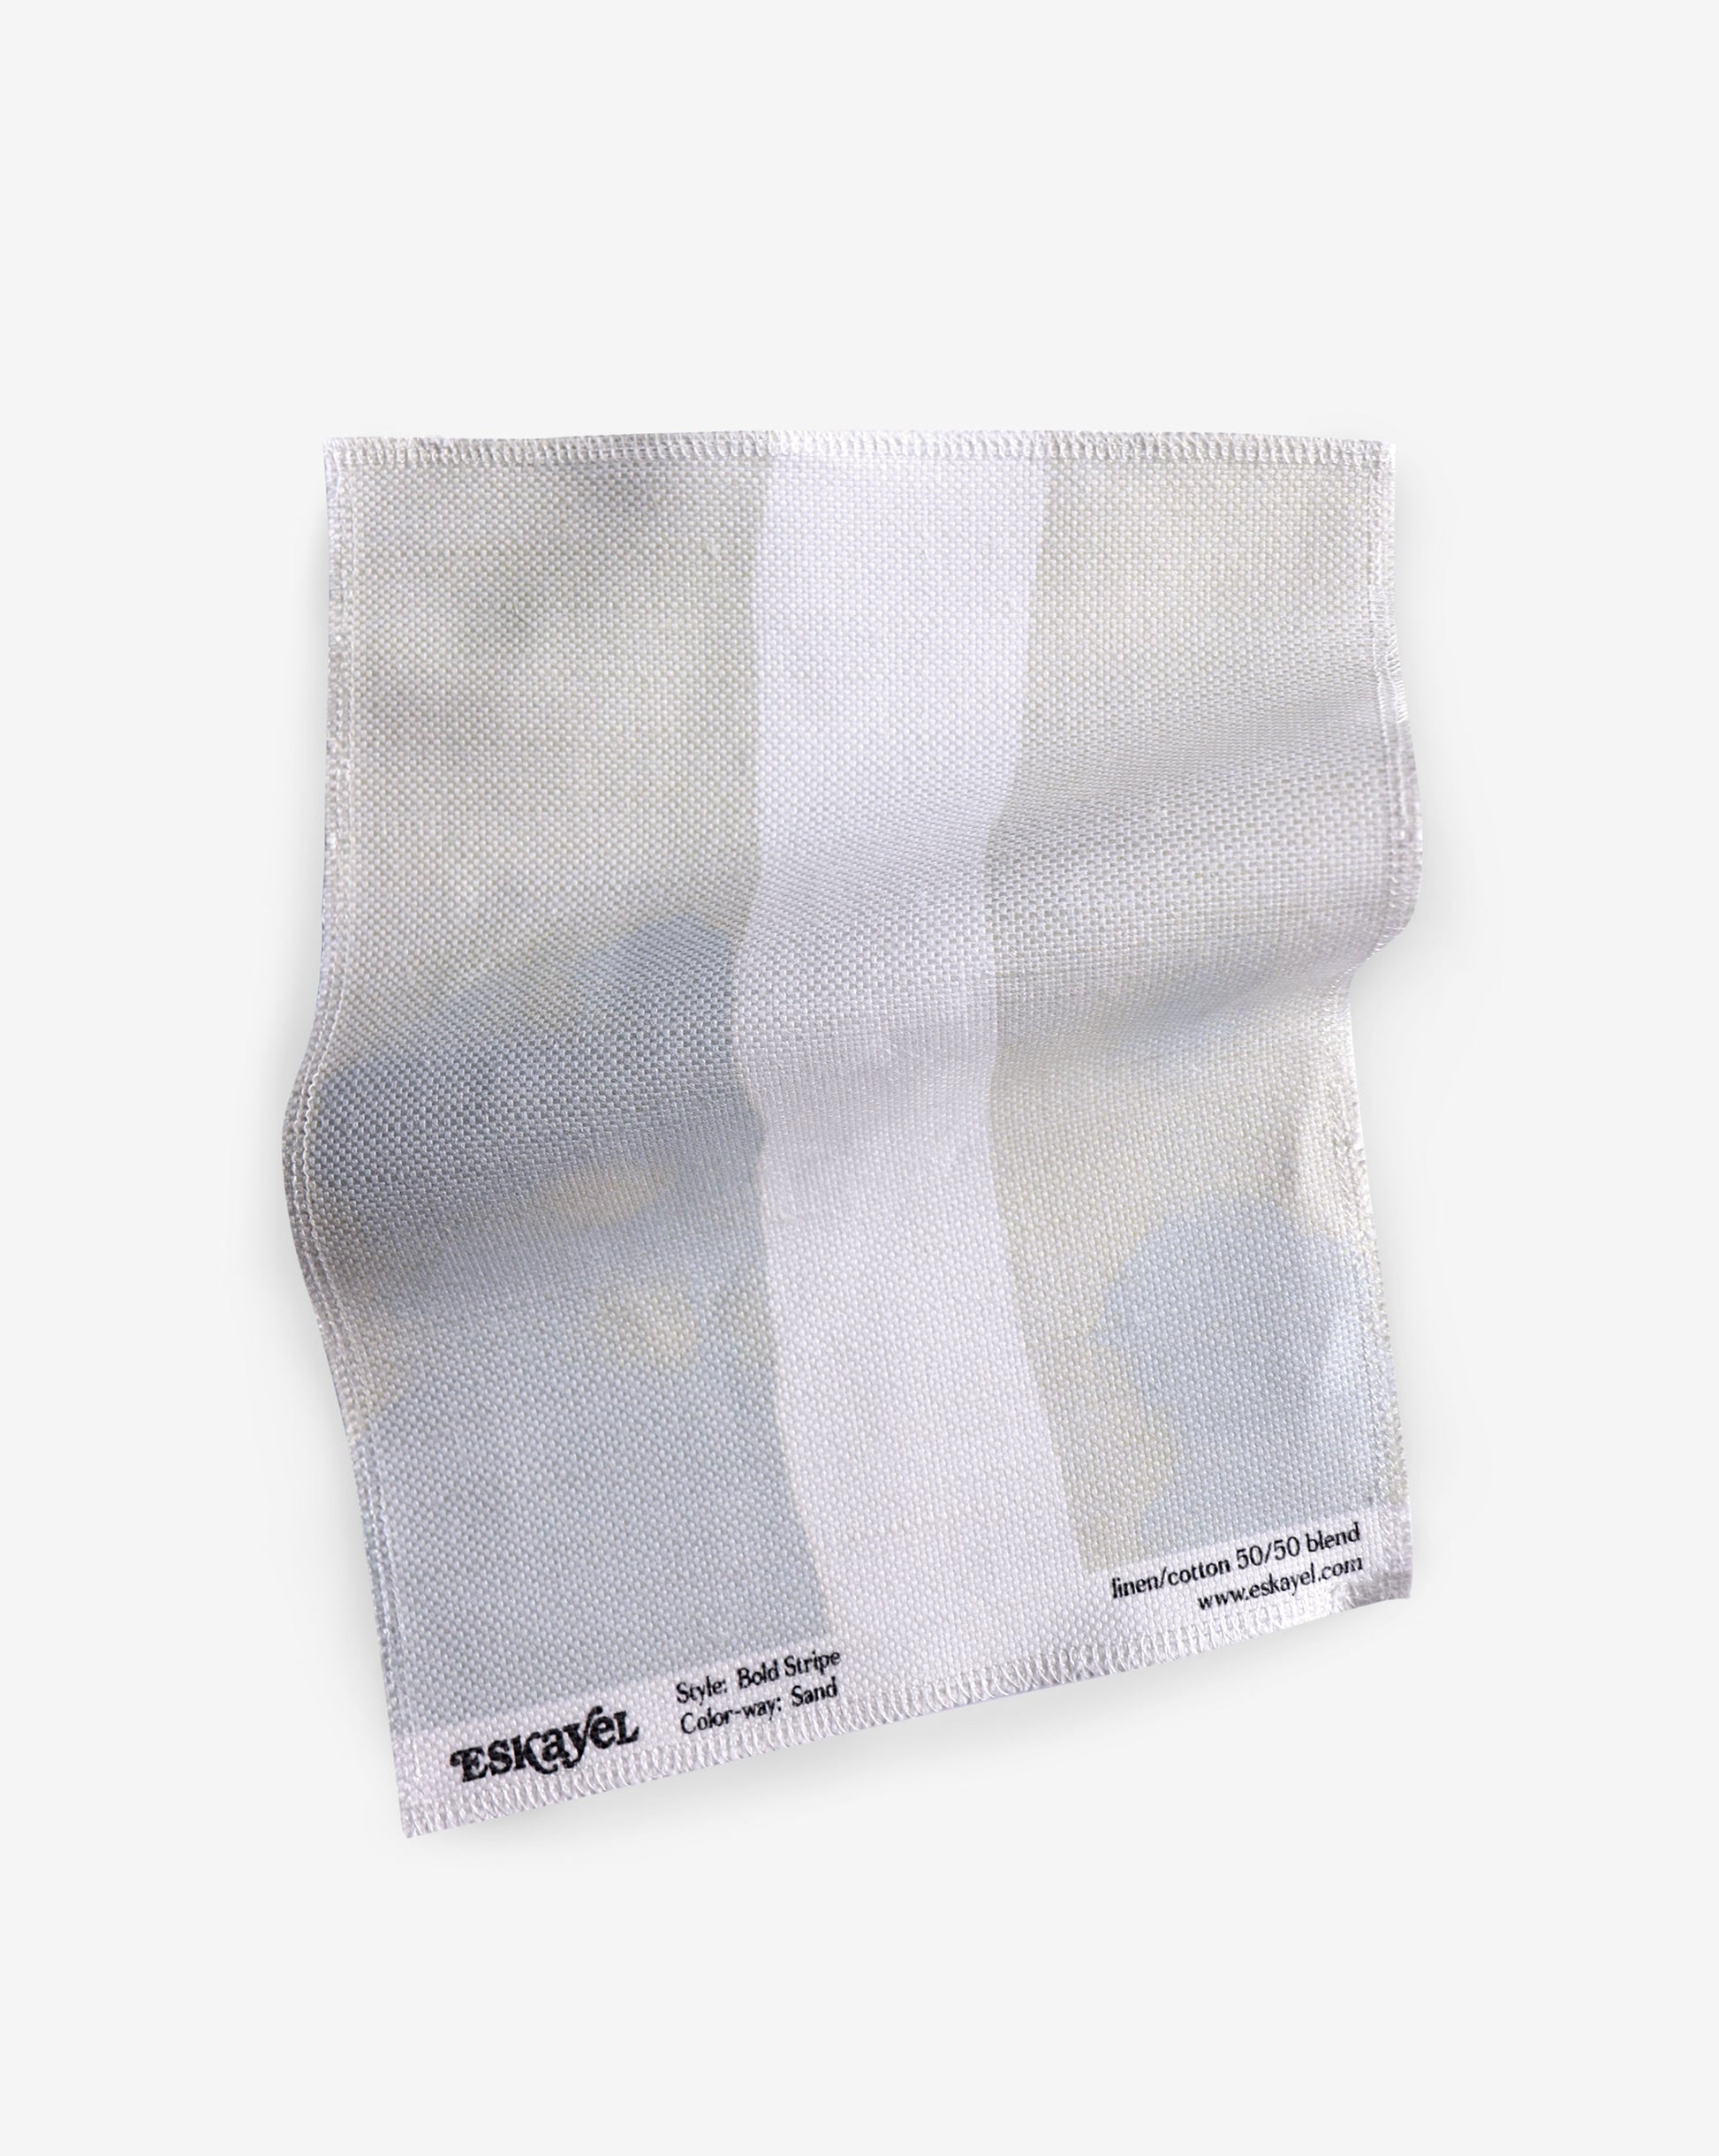 A white cloth with a white Bold Stripe Fabric||Sand on it.